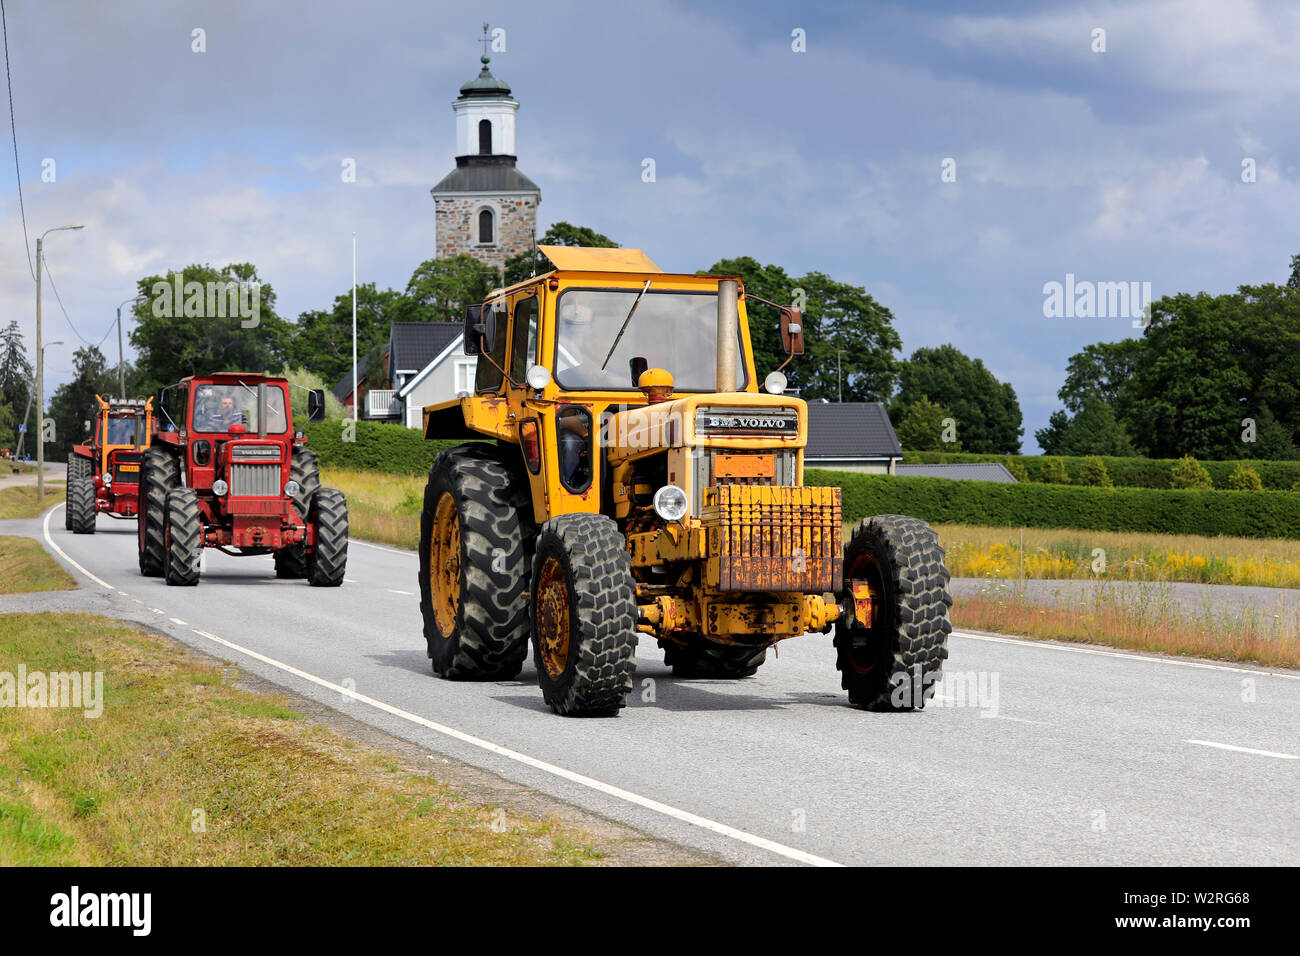 Kimito, Finland. July 6, 2019. Three Volvo BM tractors, yellow 814 first, on Kimito Tractorkavalkad, annual tractor parade through the small town. Stock Photo